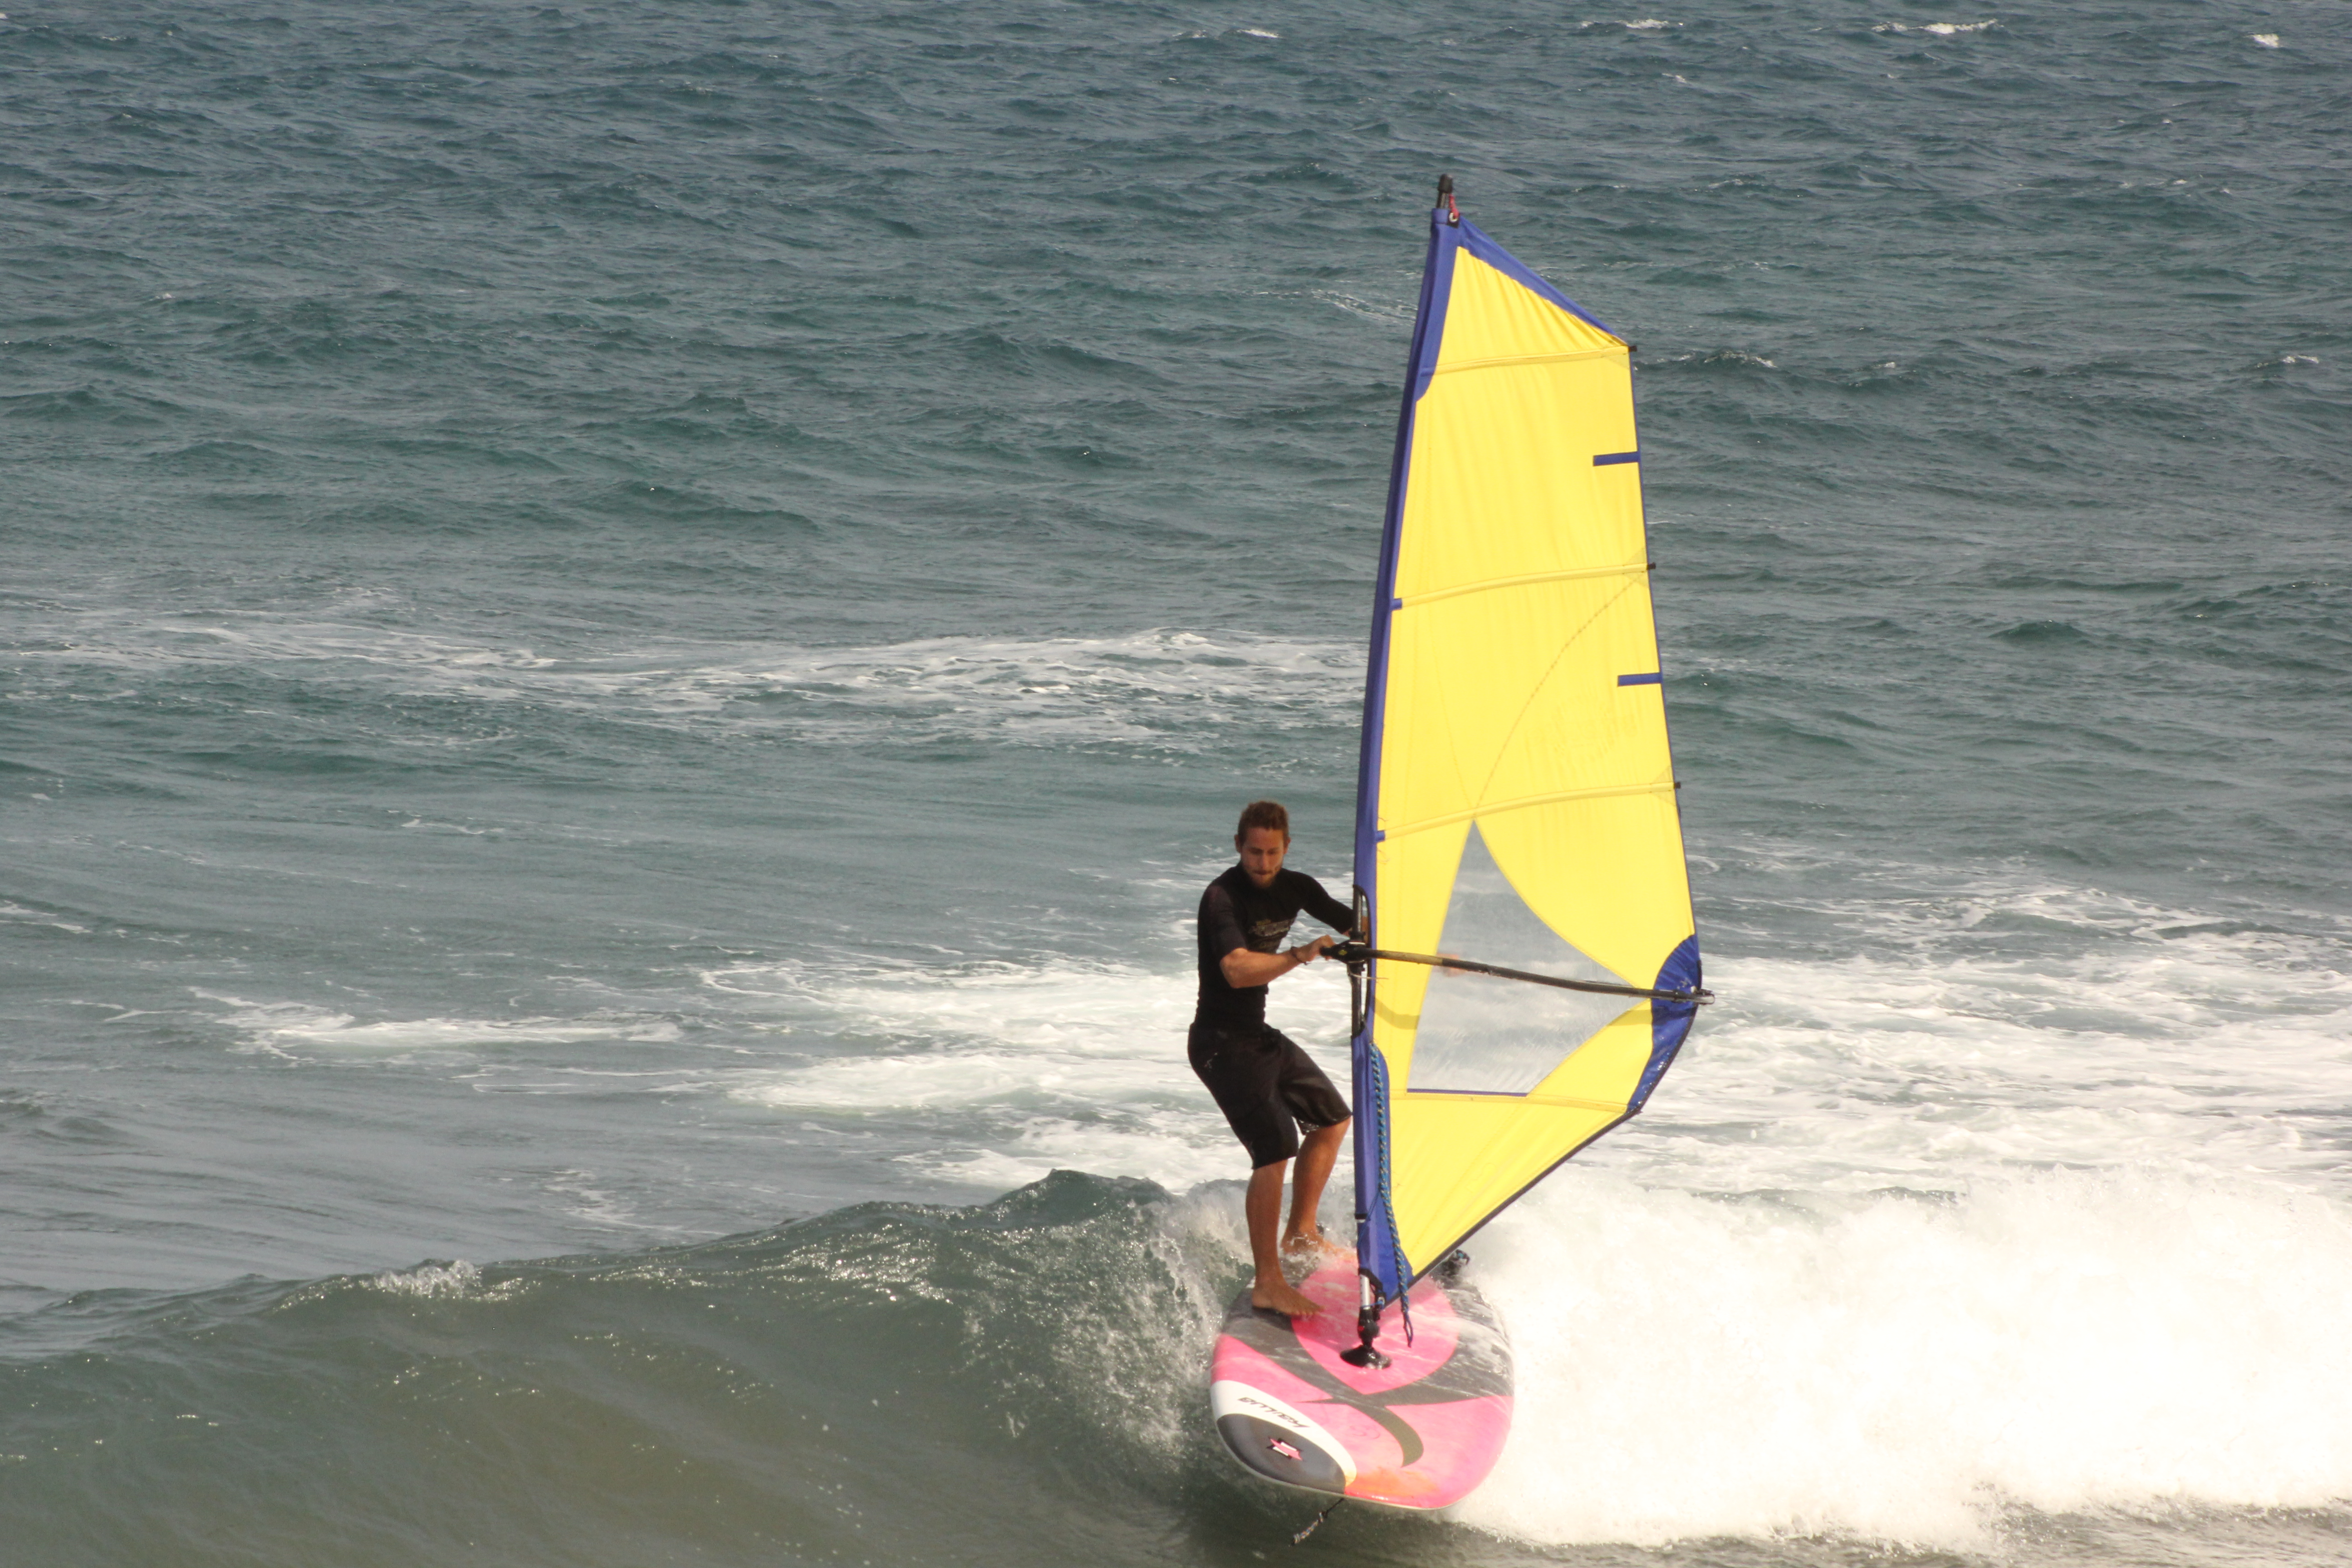 Hit the Brakes – How to Stop in Windsurfing